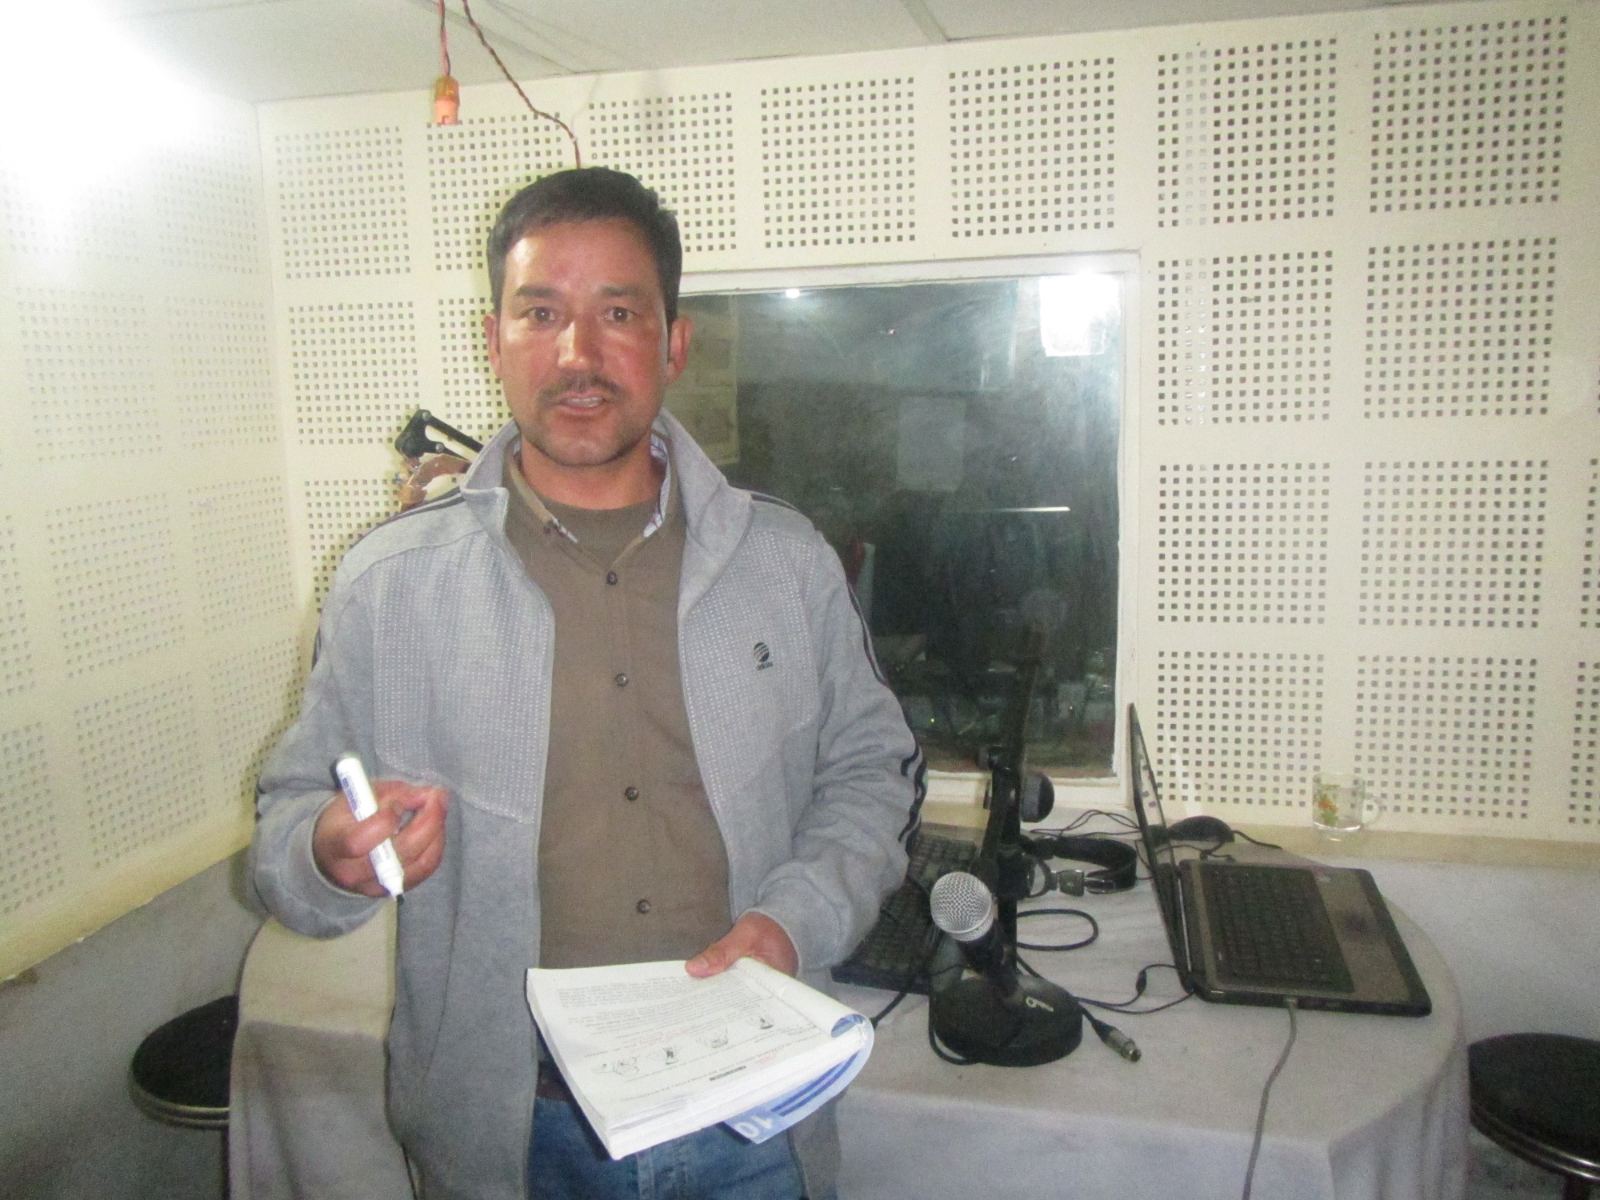 Distance learning radio program launched by Adara in Nepal